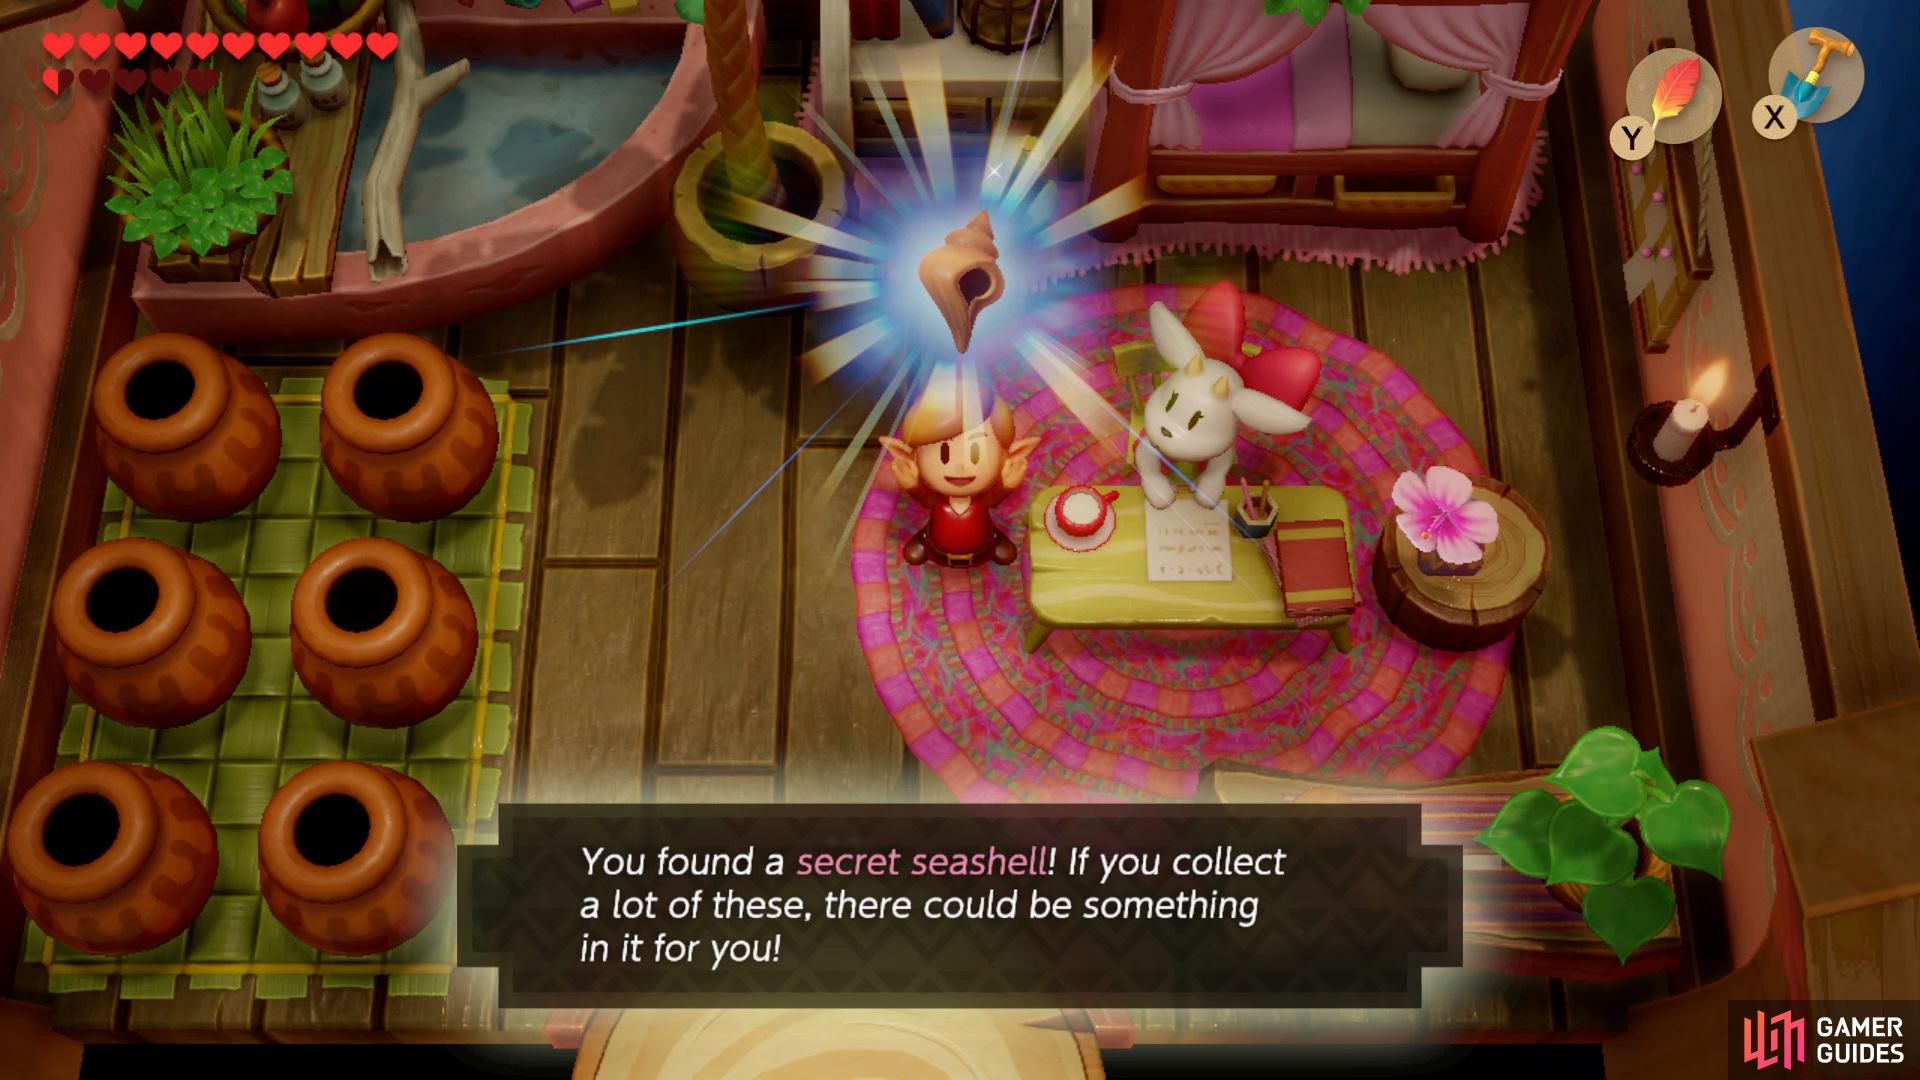 Collect the Secret Seashell from Cristine after delivering the Goat's Letter.